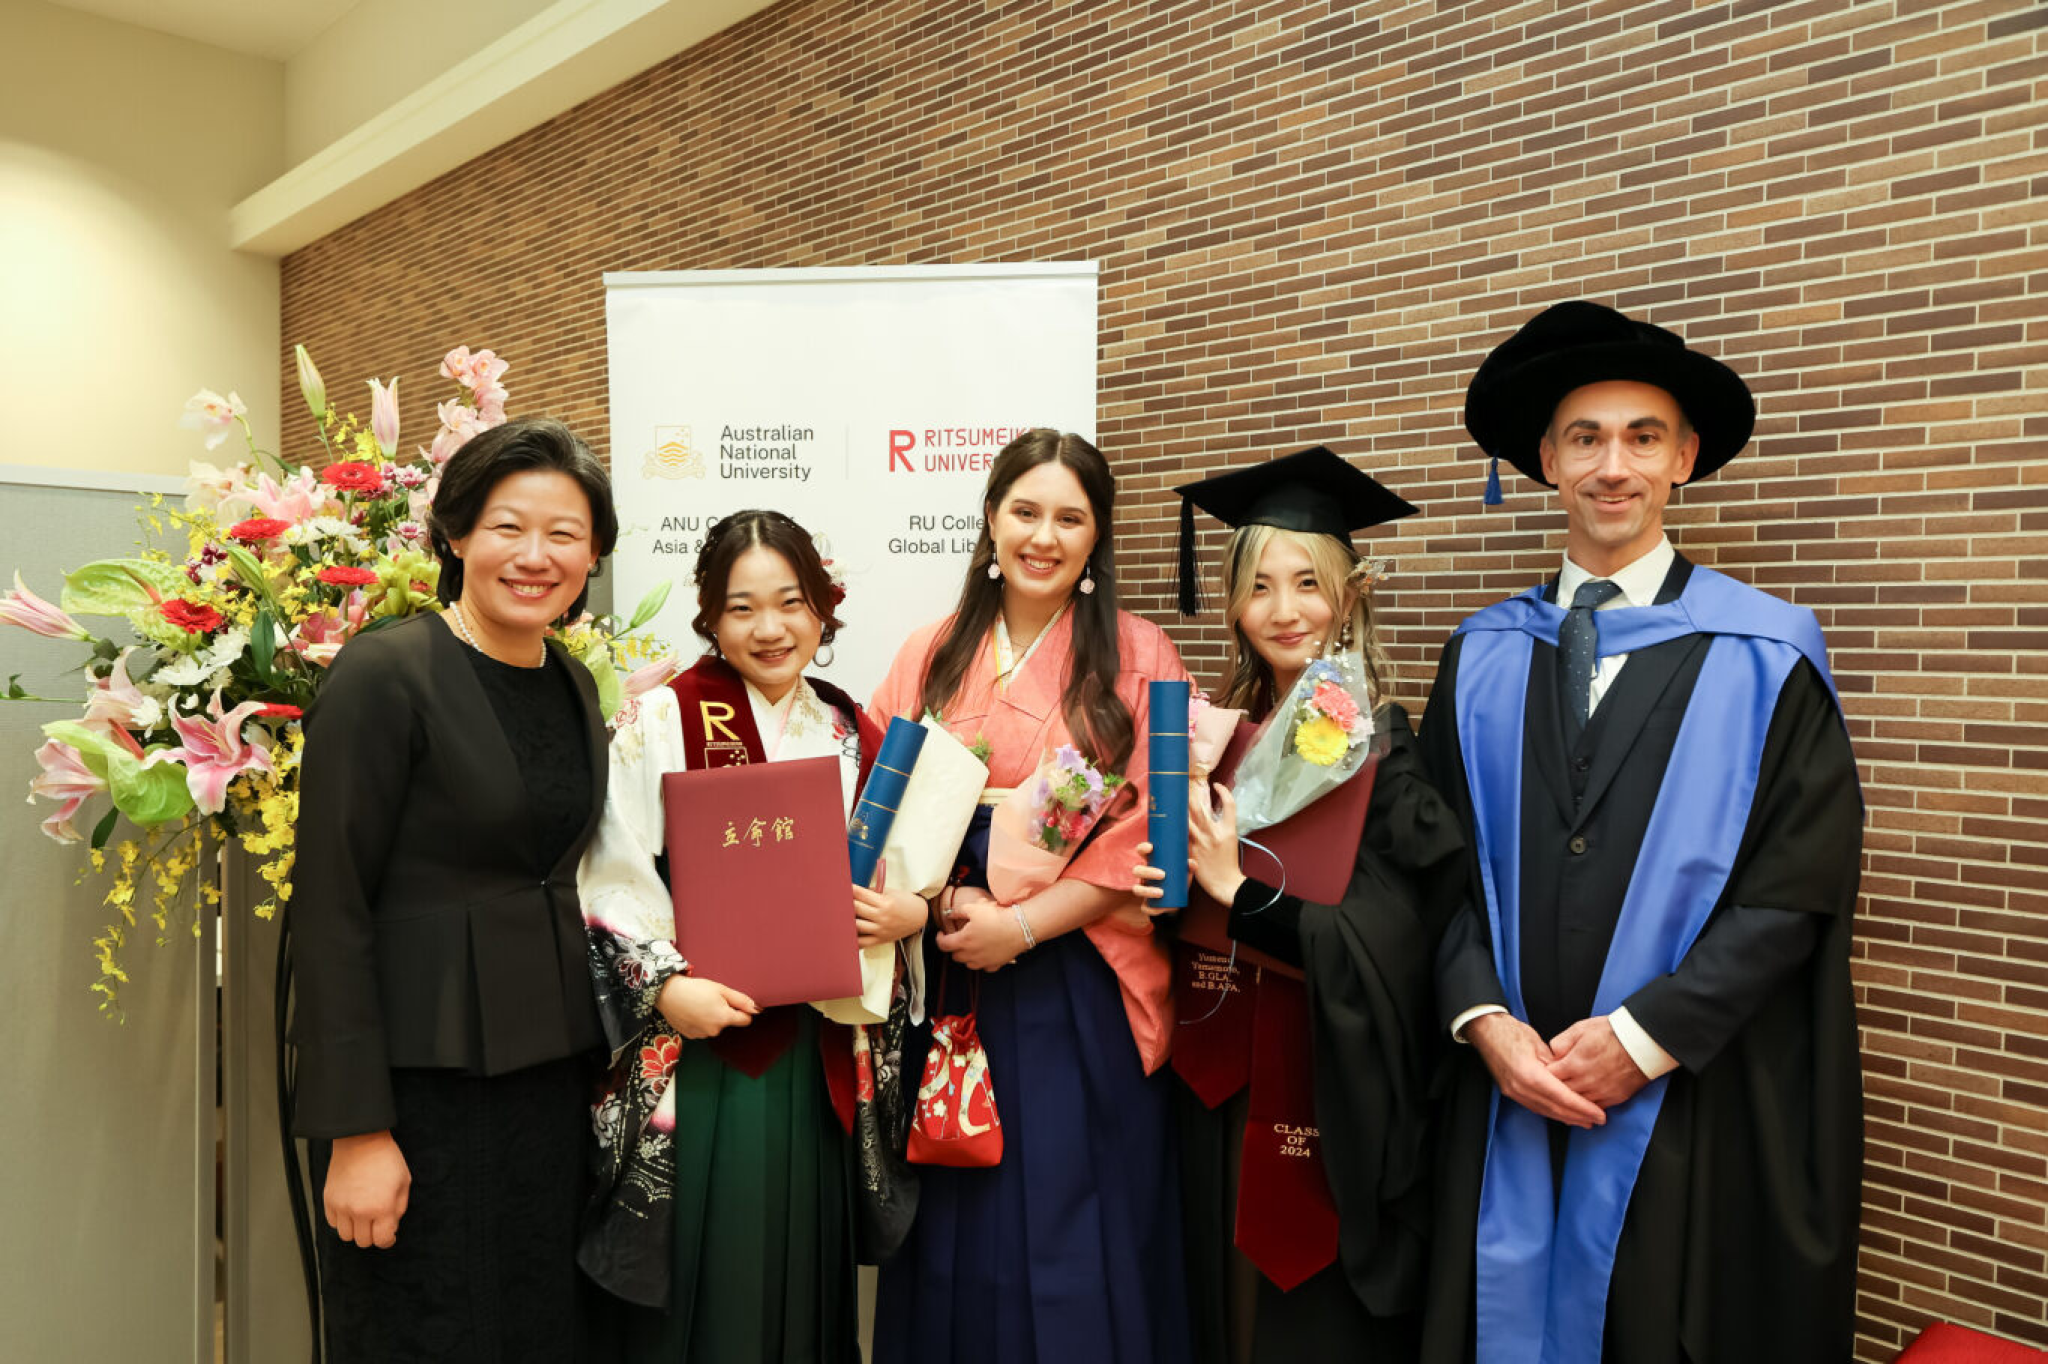 Graduates with RU staff and Dr Christopher Hobson from ANU